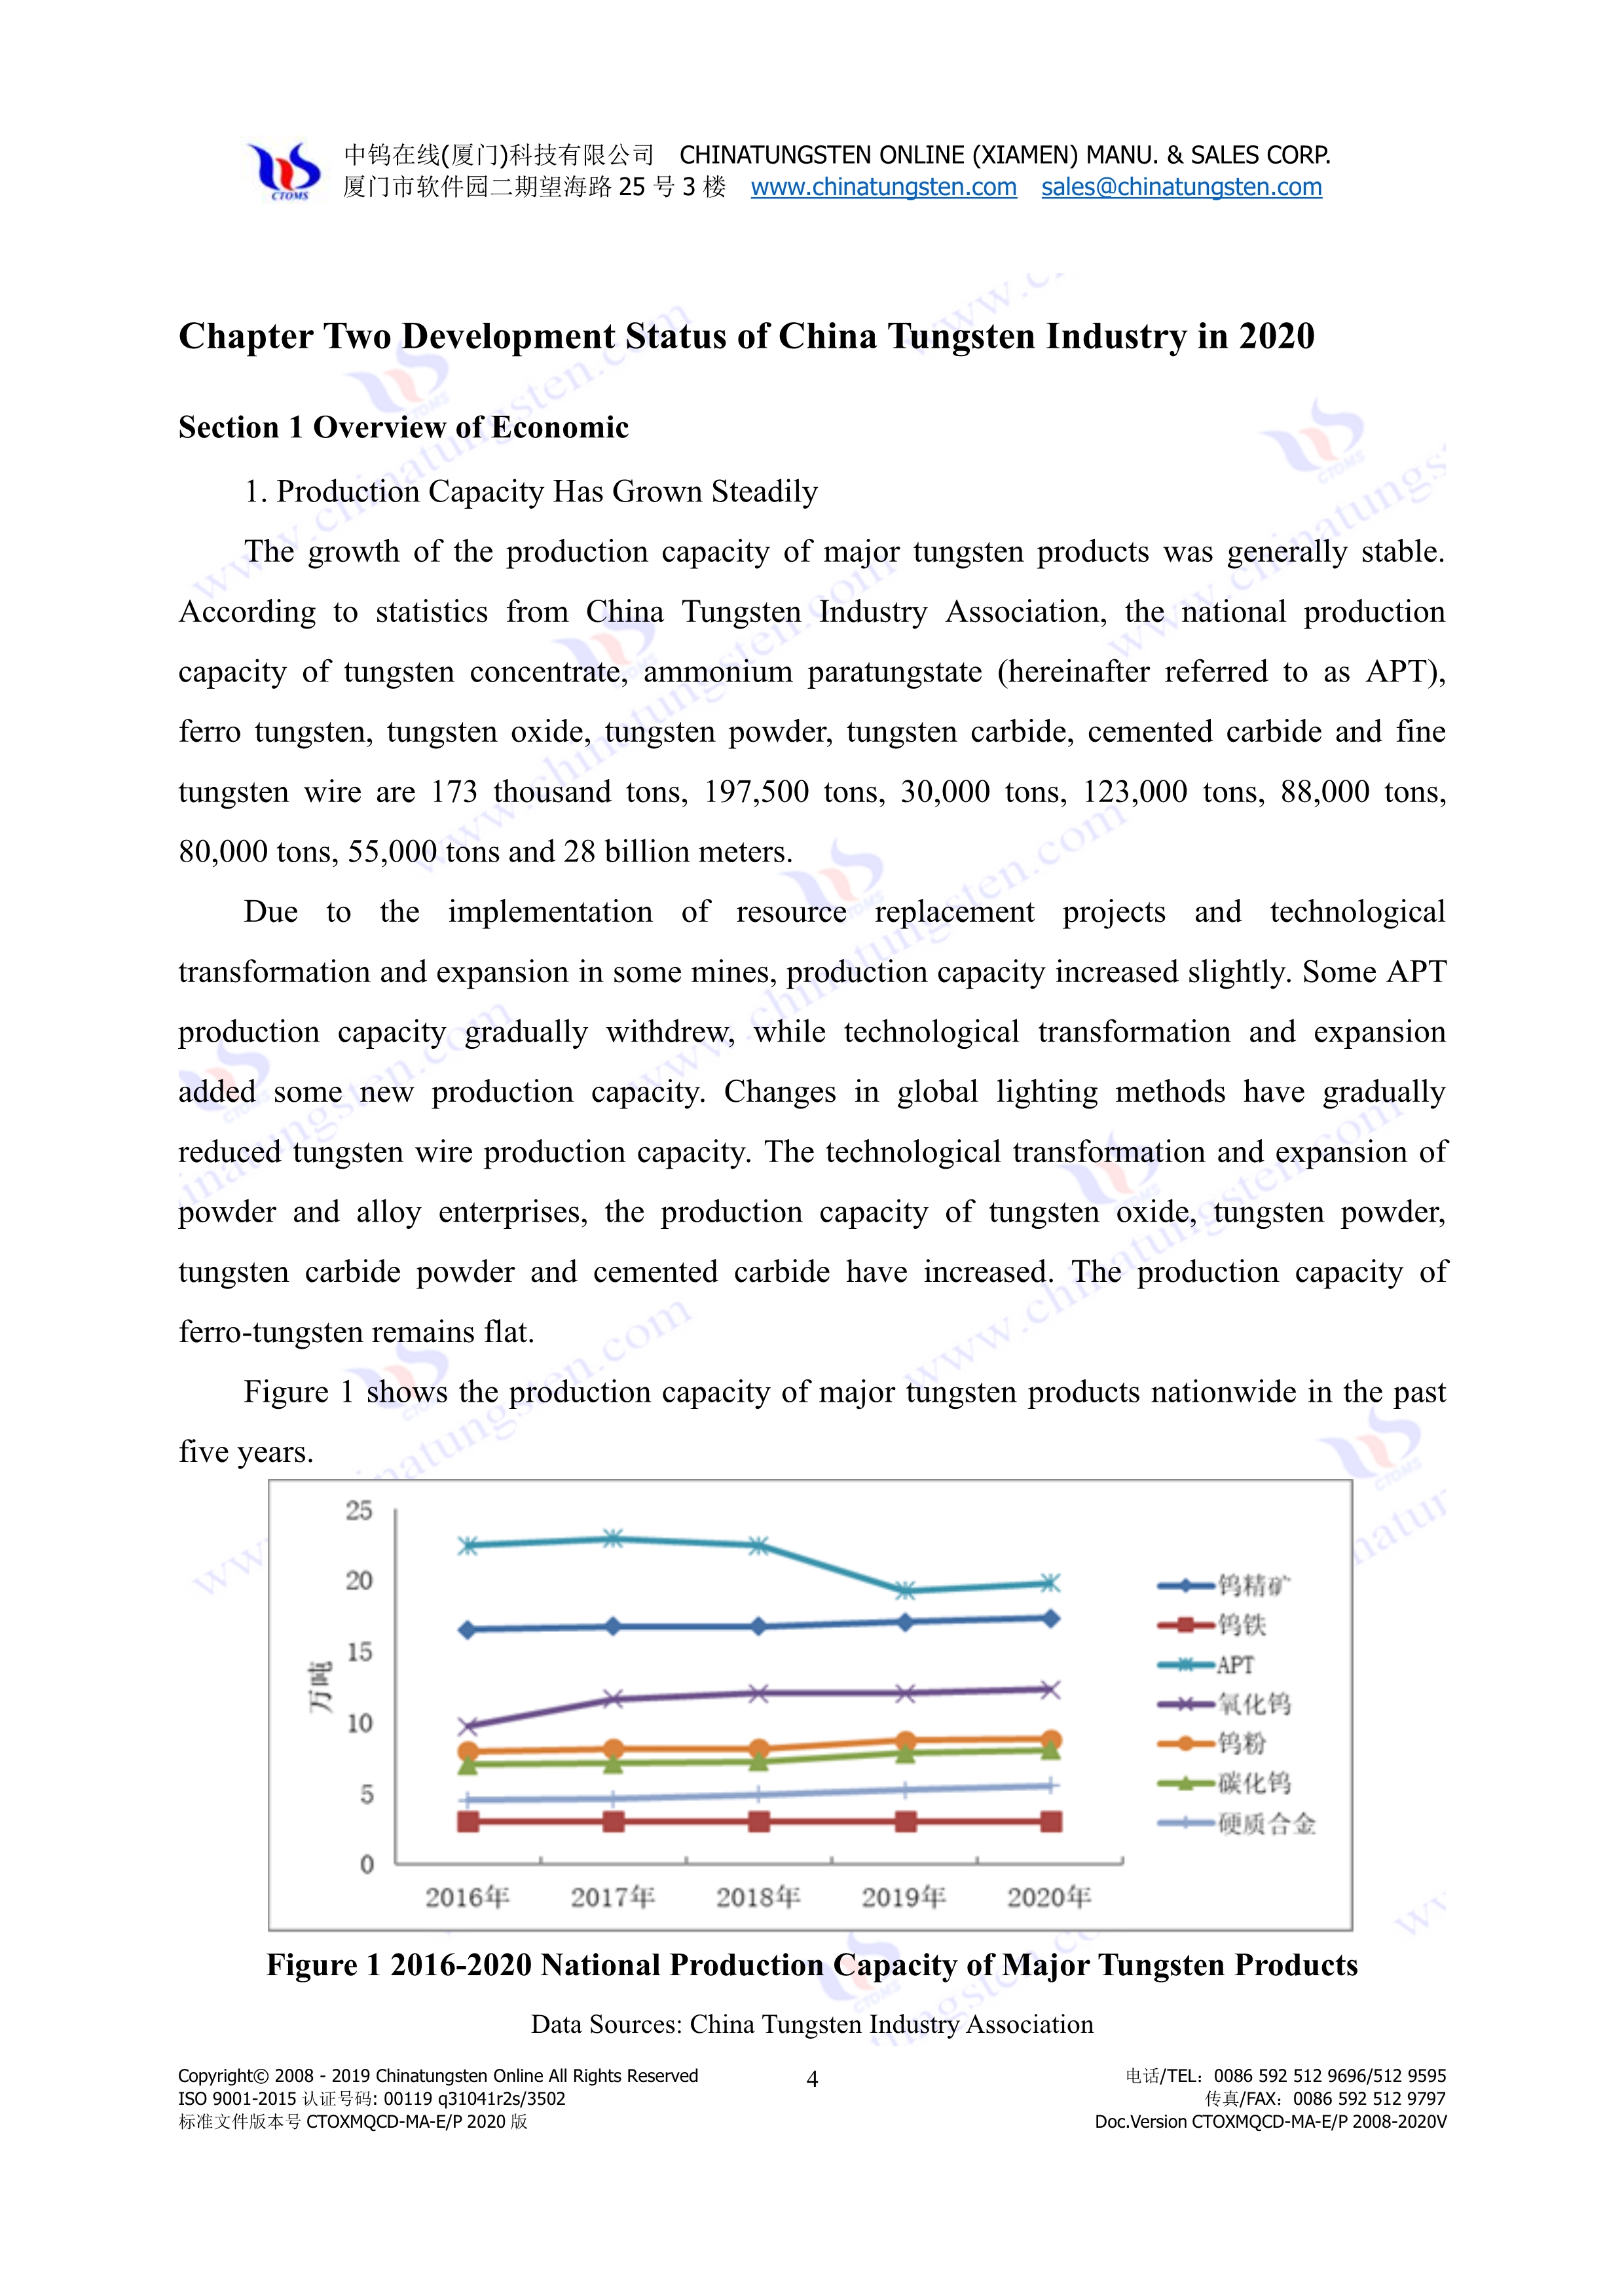 China tungsten industry economic overview in 2020 picture